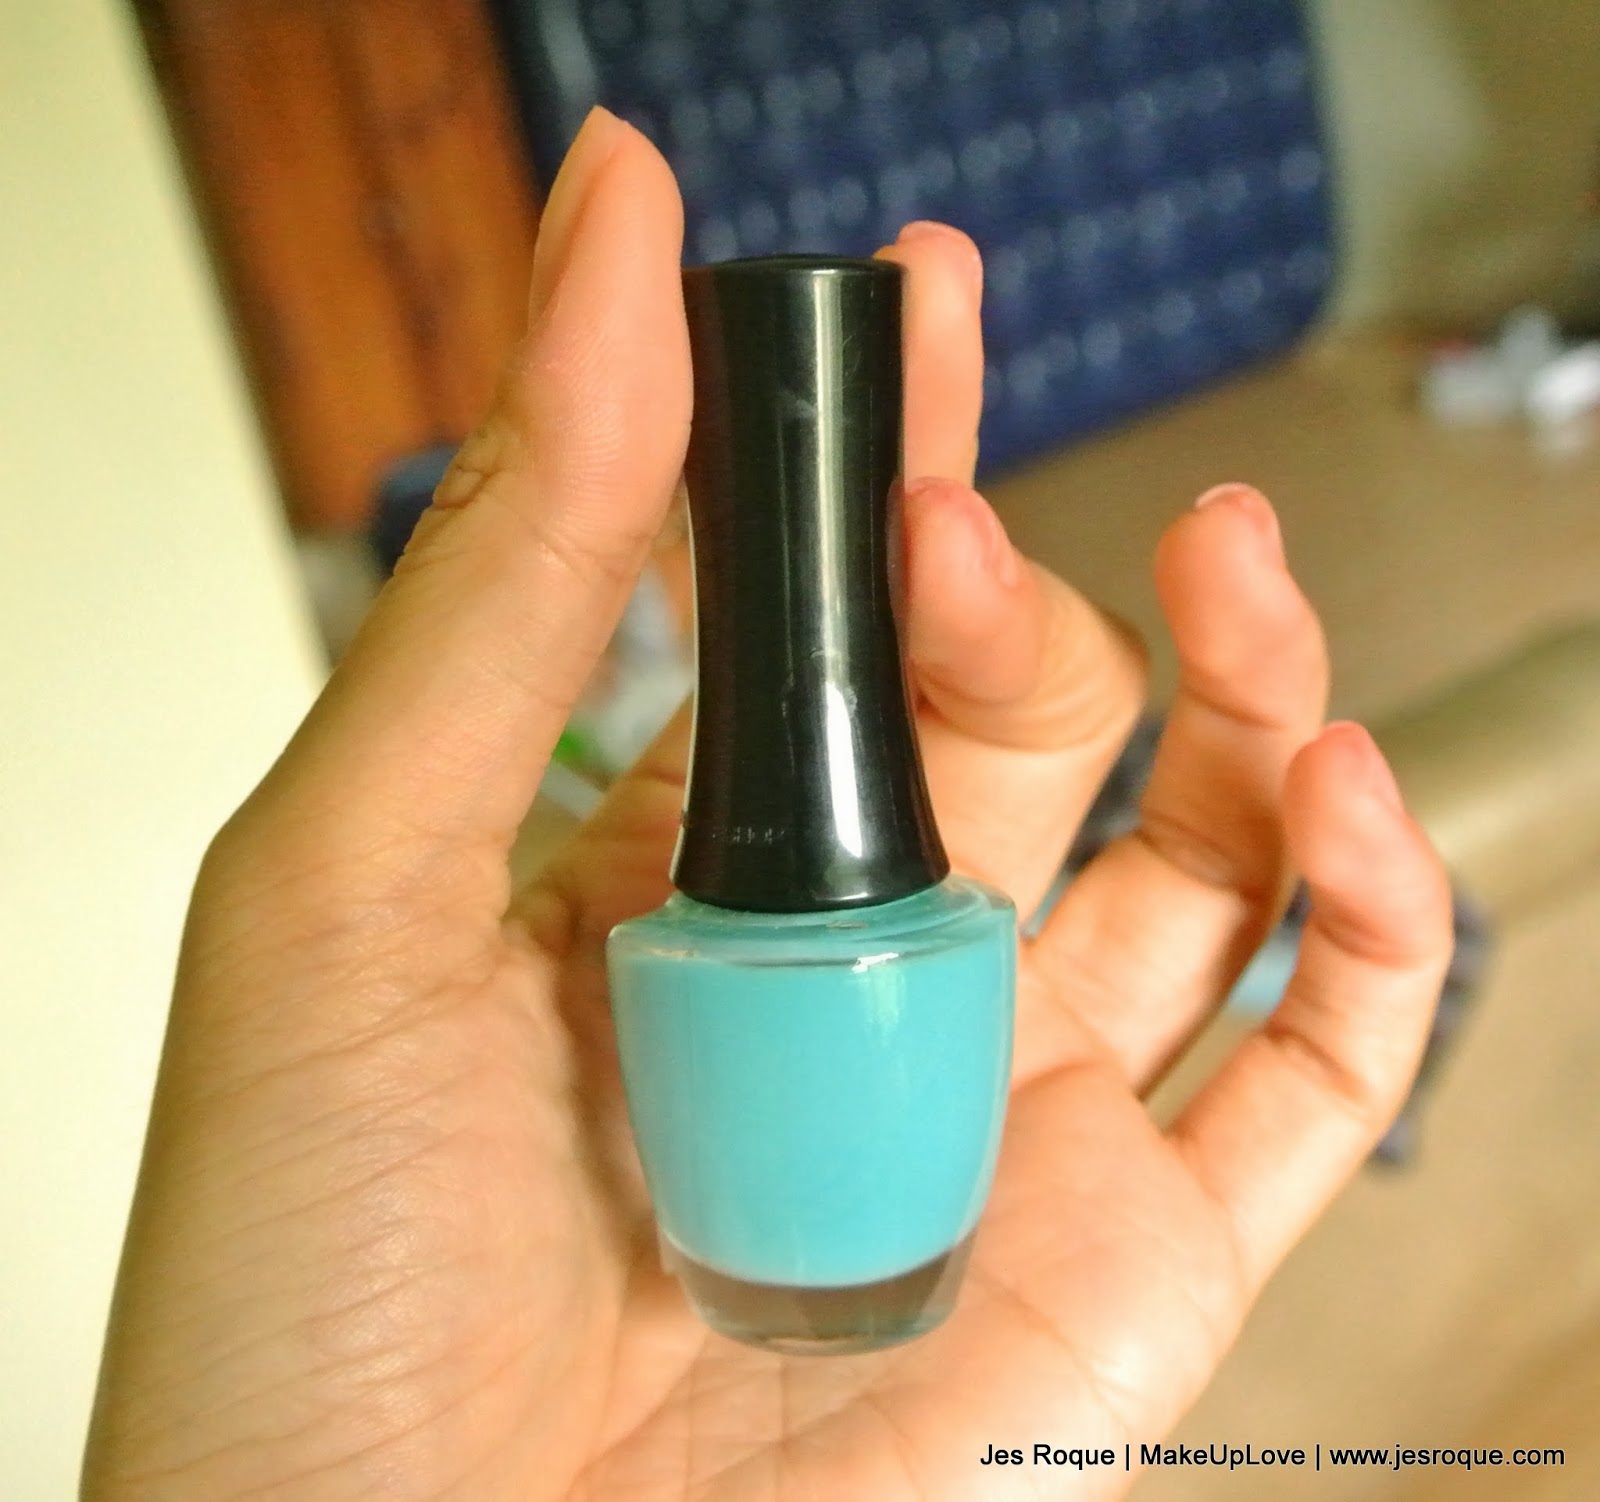 On My Nails: Korean | Etude House and The Face Shop